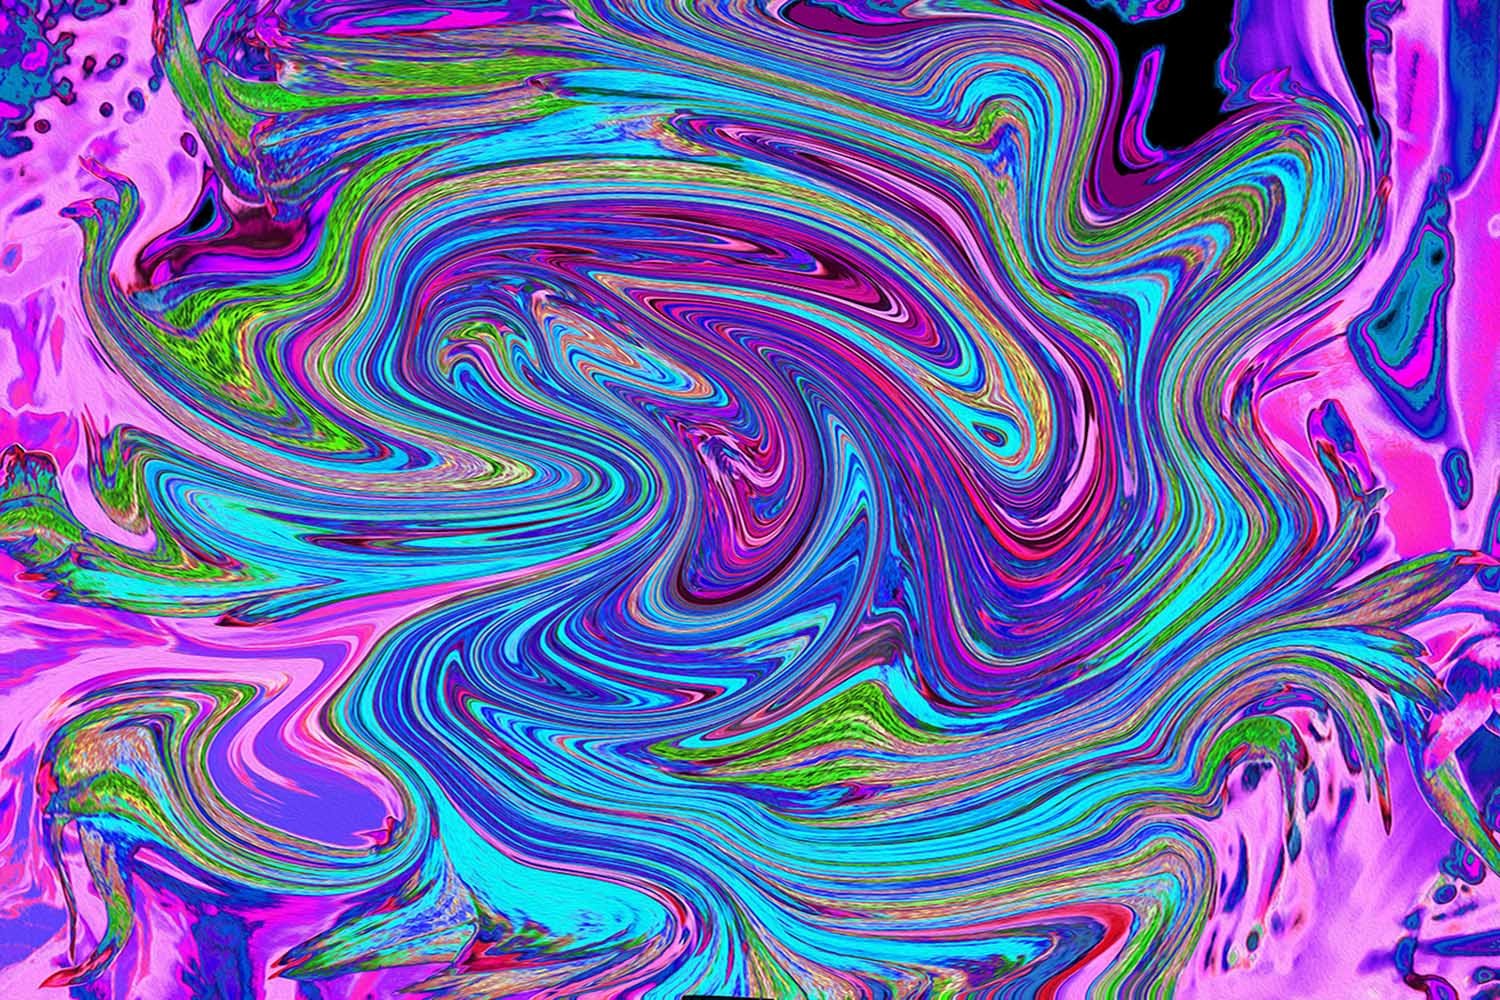 Blue, Pink and Purple Groovy Abstract Retro Art